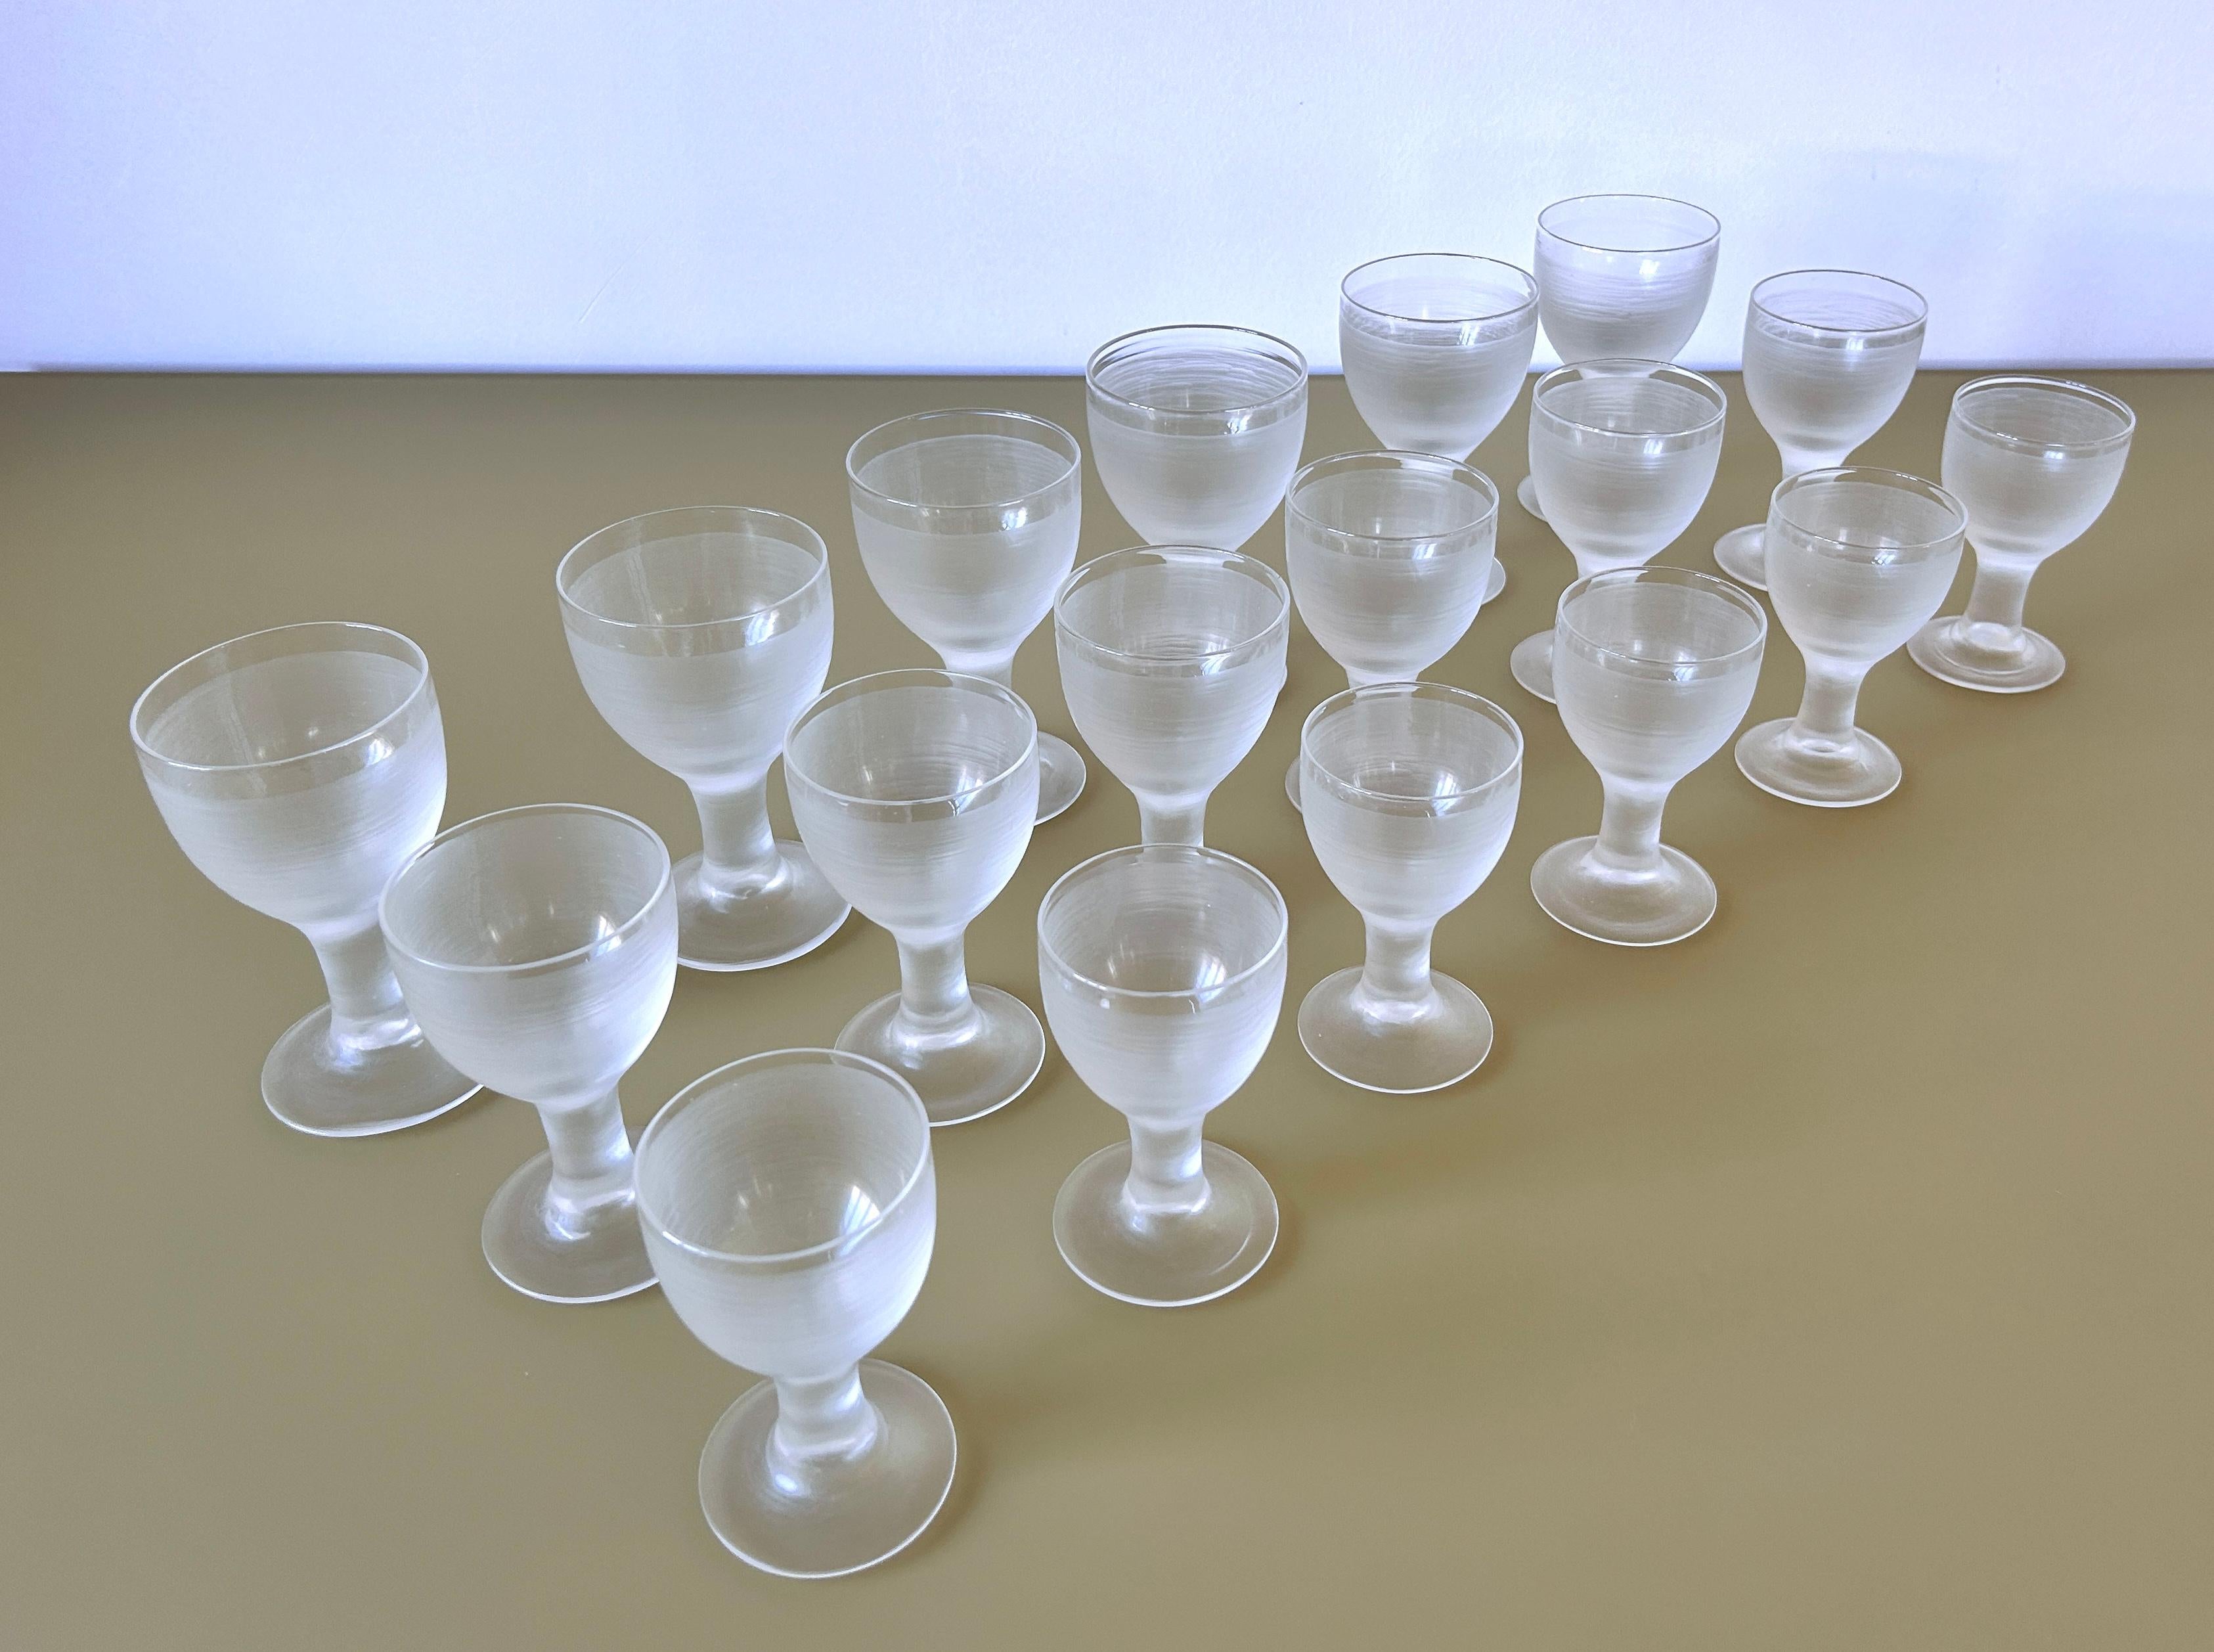 The ‘High Society’ set of glassware designed by Ludovico Diaz de Santillana in 1962 represents the most costly series of glassware ever produced by Venini. The production of the model, reminiscent of vessels painted by Giorgio Morandi, was